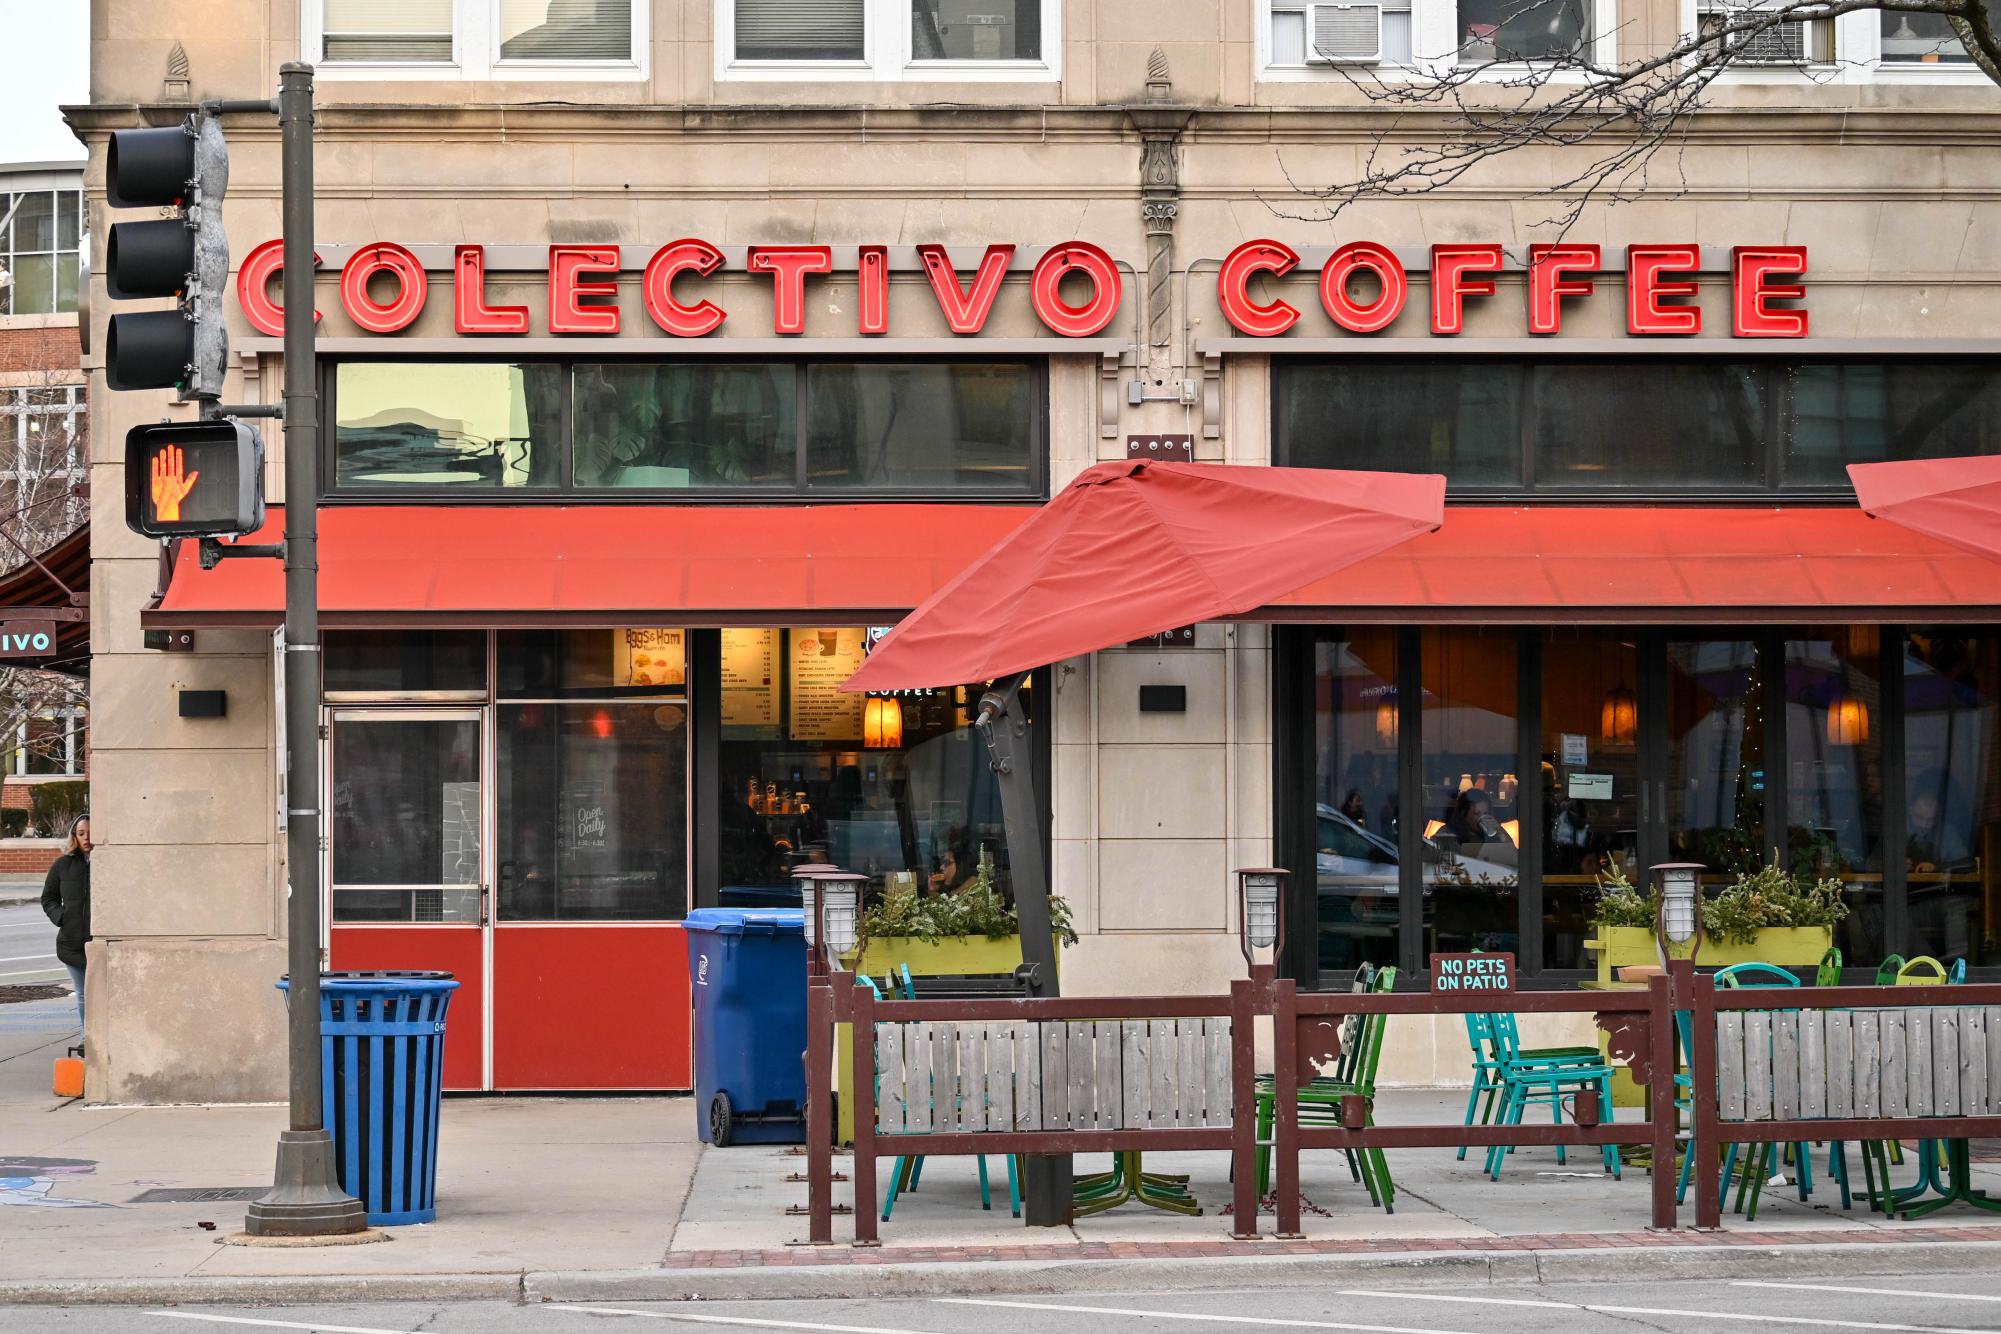 Sign that reads “Colectivo Coffee” over a patio.